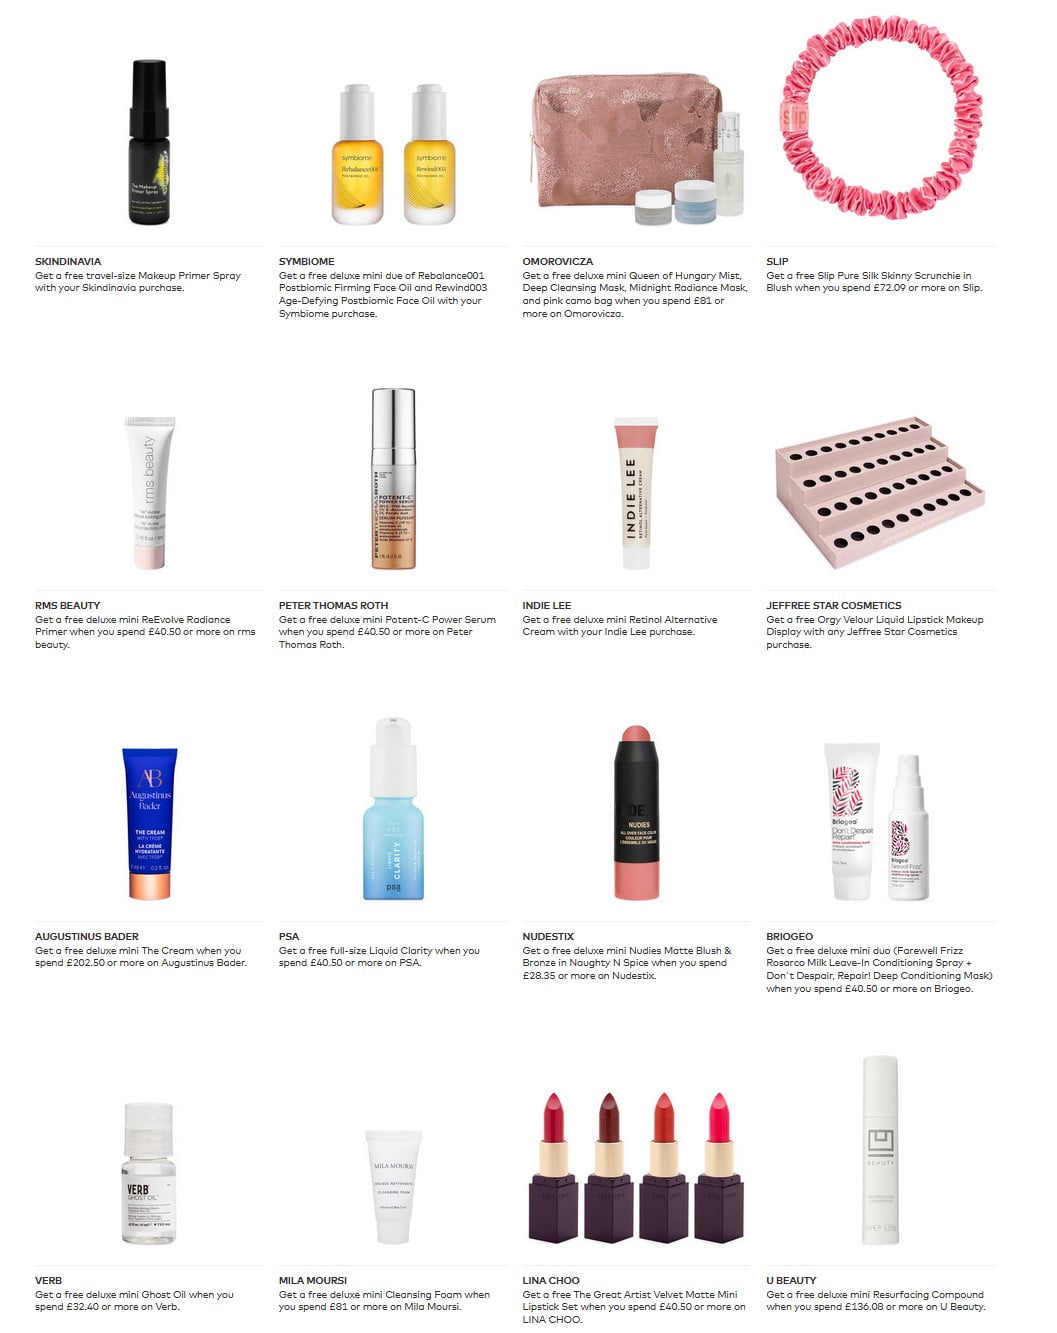 Gft with purchase offers at Beautylish